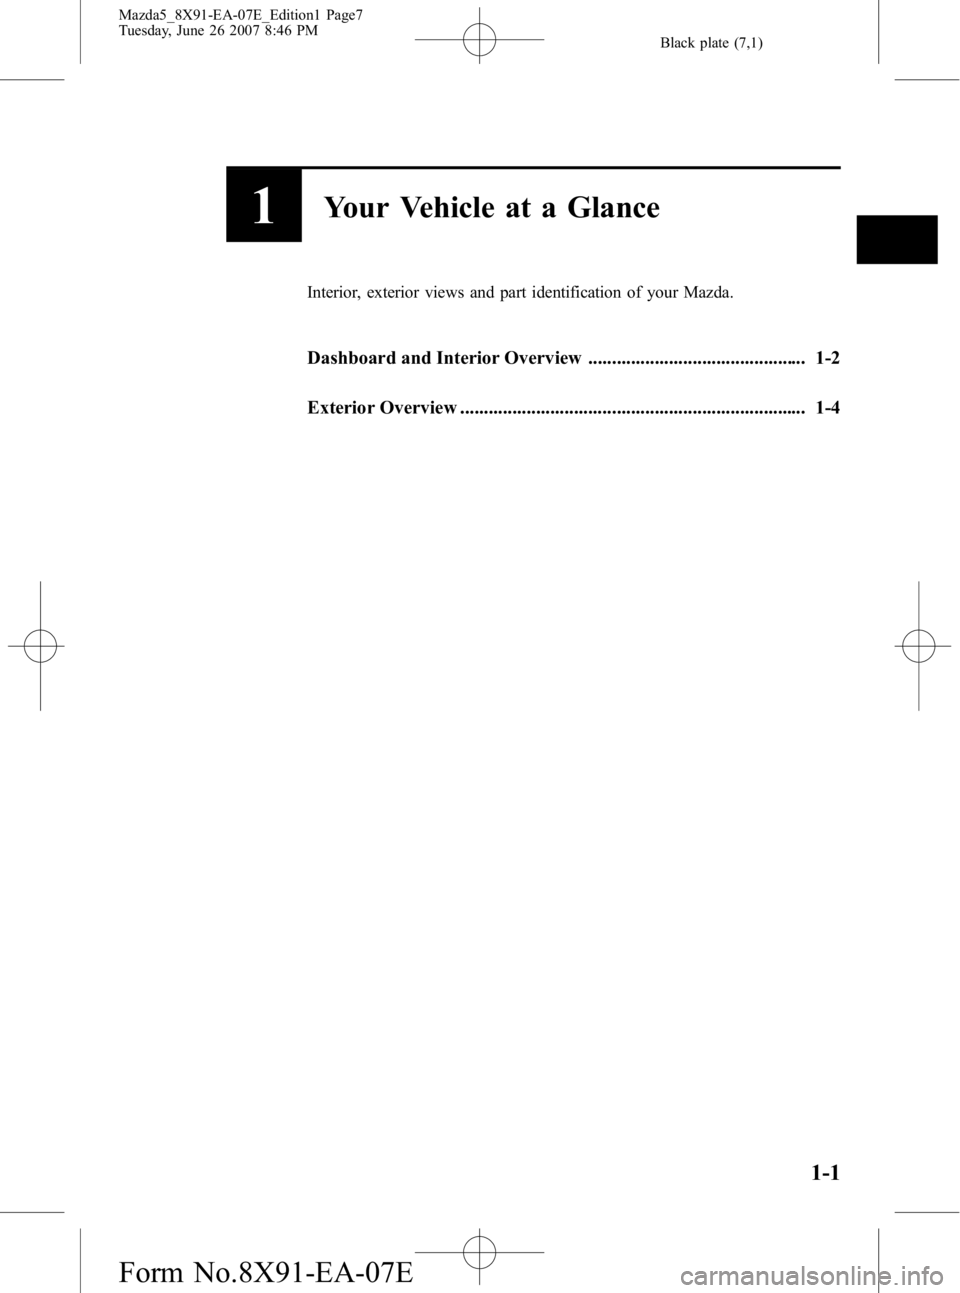 MAZDA MODEL 5 2007  Owners Manual Black plate (7,1)
1Your Vehicle at a Glance
Interior, exterior views and part identification of your Mazda.
Dashboard and Interior Overview .............................................. 1-2
Exterior 